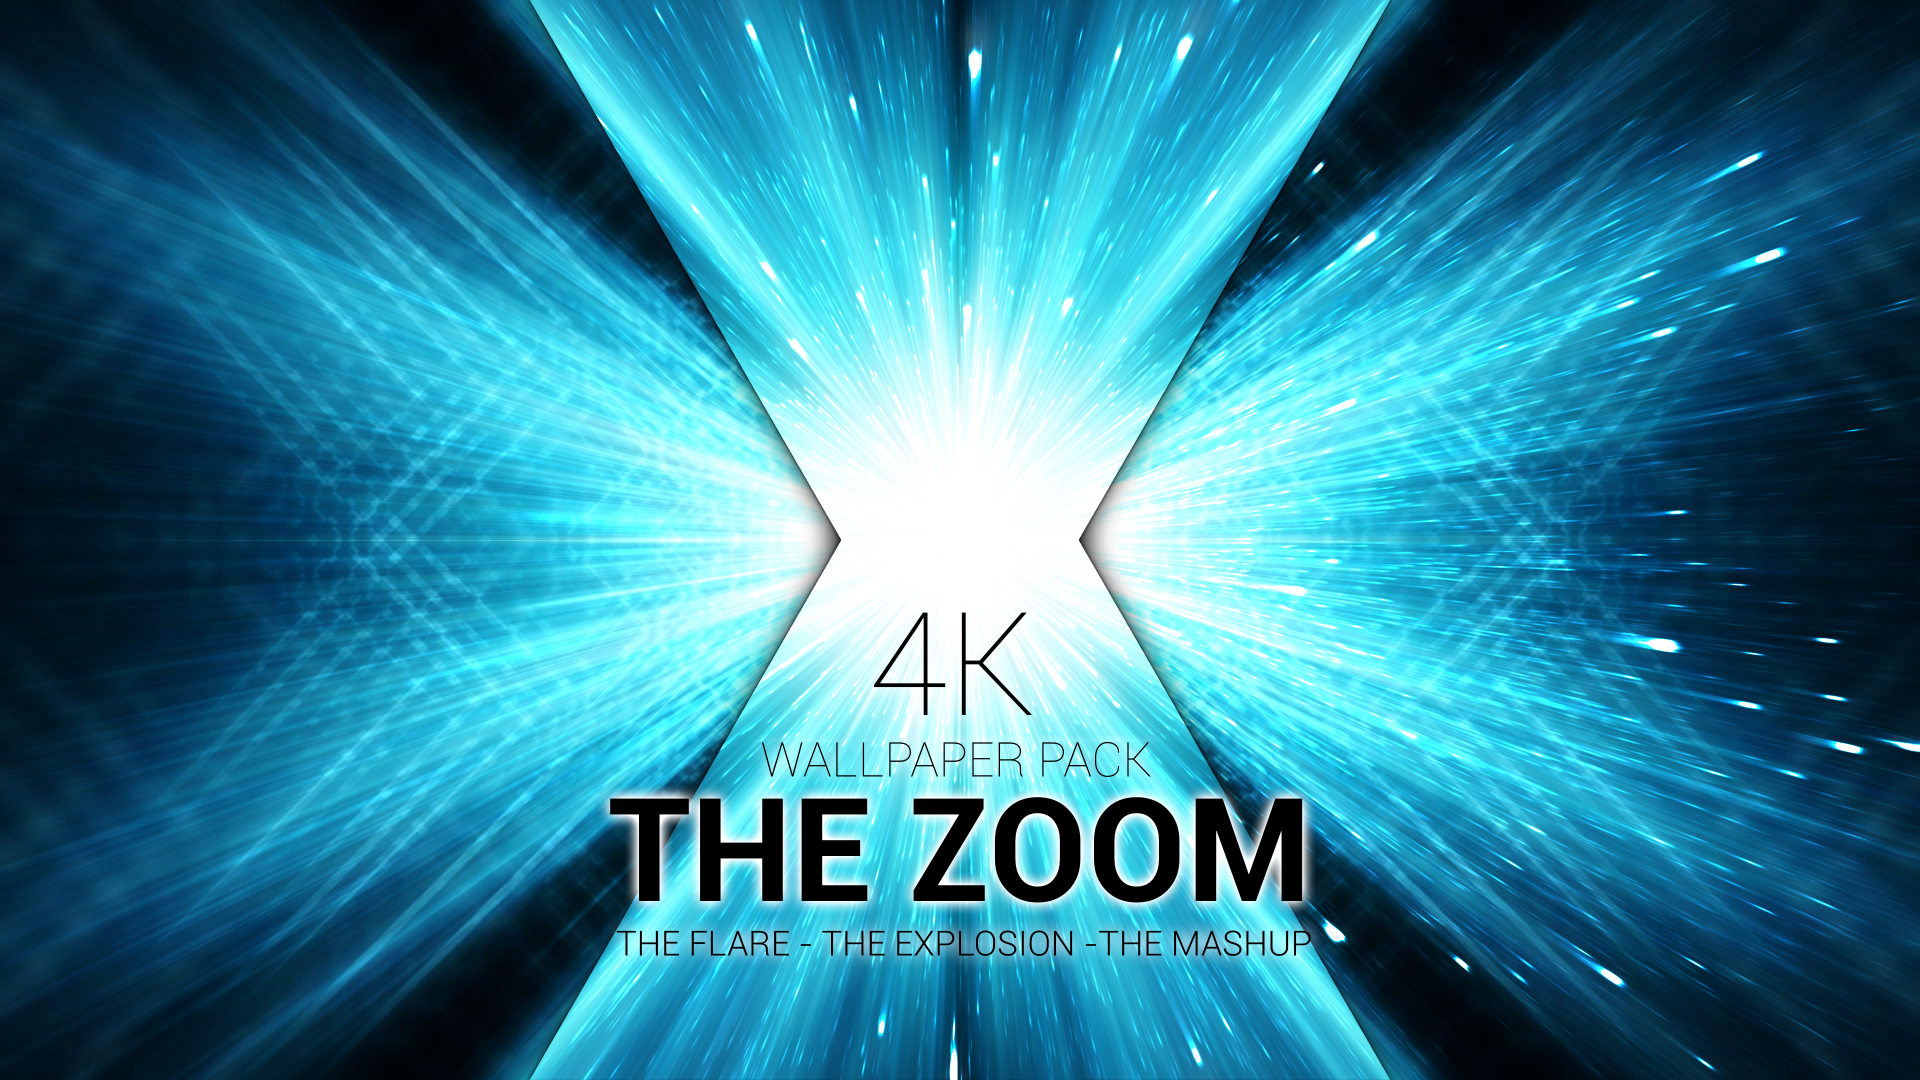 Wallpaper Pack: The Zoom by Mauritaly on DeviantArt